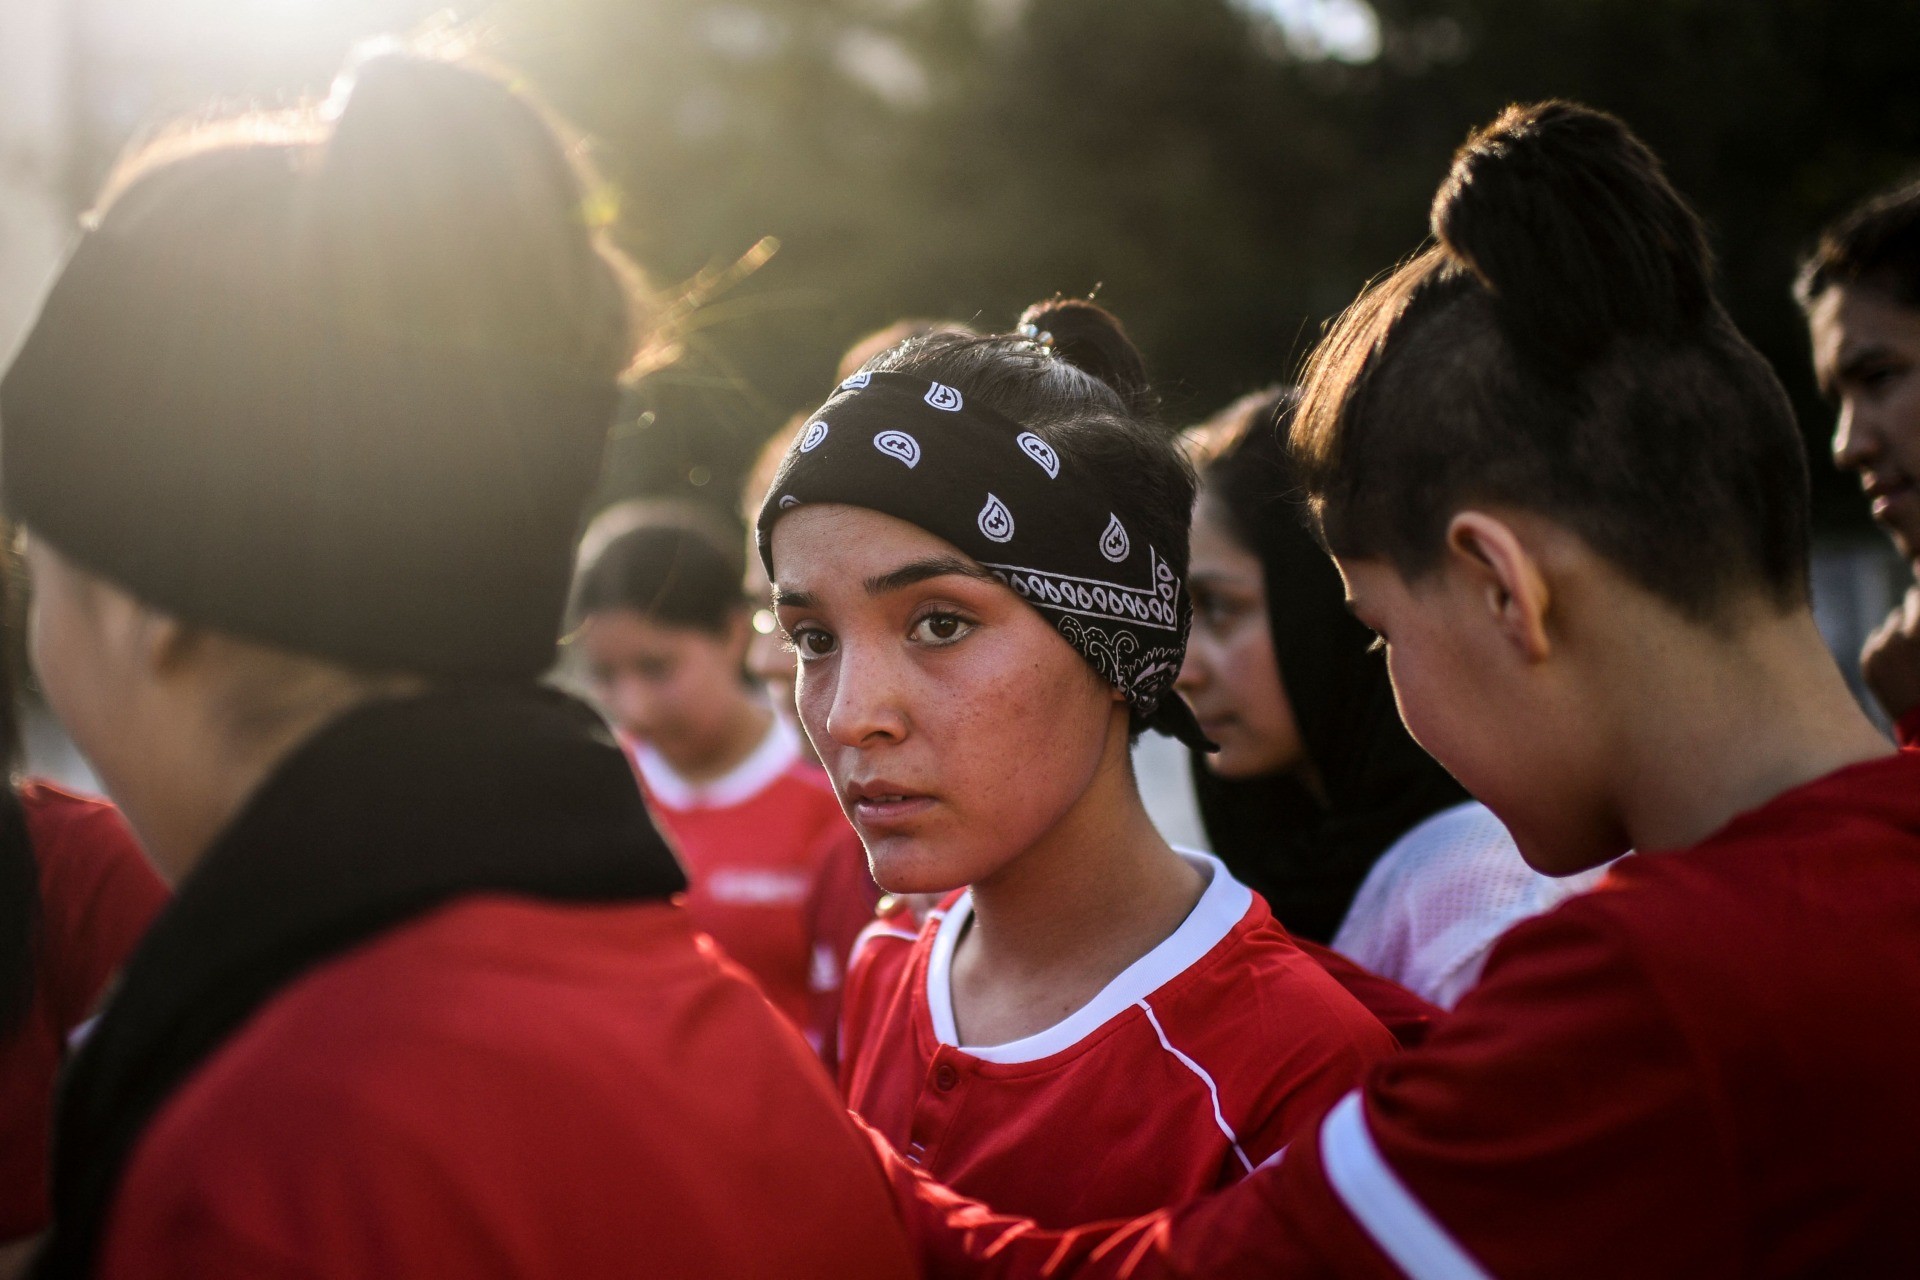 Players of Afghanistan national women football team attend to a training session at Odivelas, outskirts of Lisbon on September 30, 2021. - Forced to flee Afghanistan after the Taliban came to power, players of the women's national football team and their families were welcomed to Portugal where they were able to train again today in a suburban stadium of Lisbon. (Photo by PATRICIA DE MELO MOREIRA / AFP) (Photo by PATRICIA DE MELO MOREIRA/AFP via Getty Images)